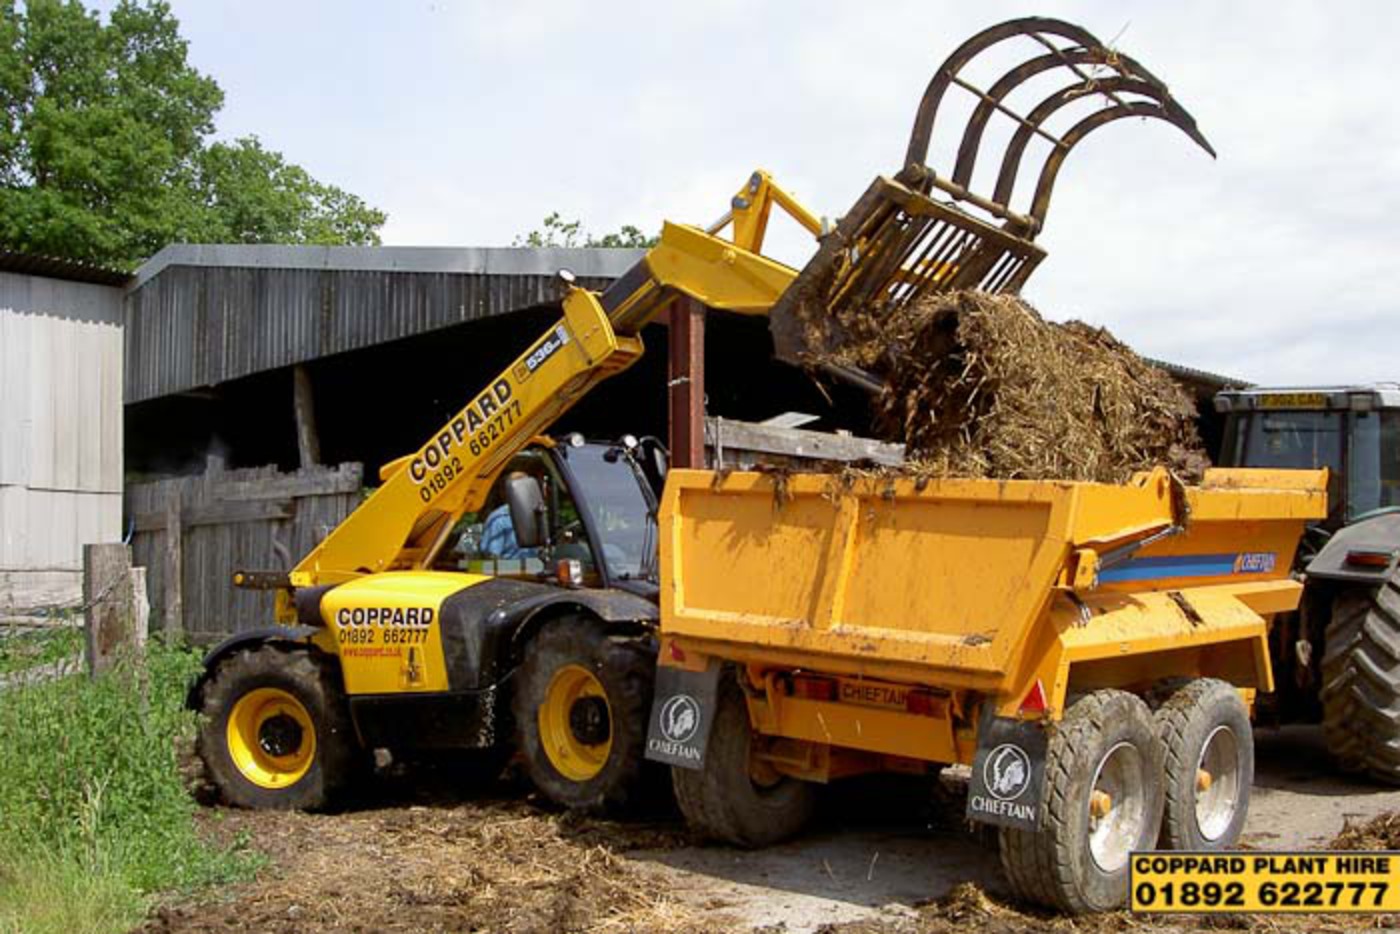 Telescopic Handlers and Attachments - t32